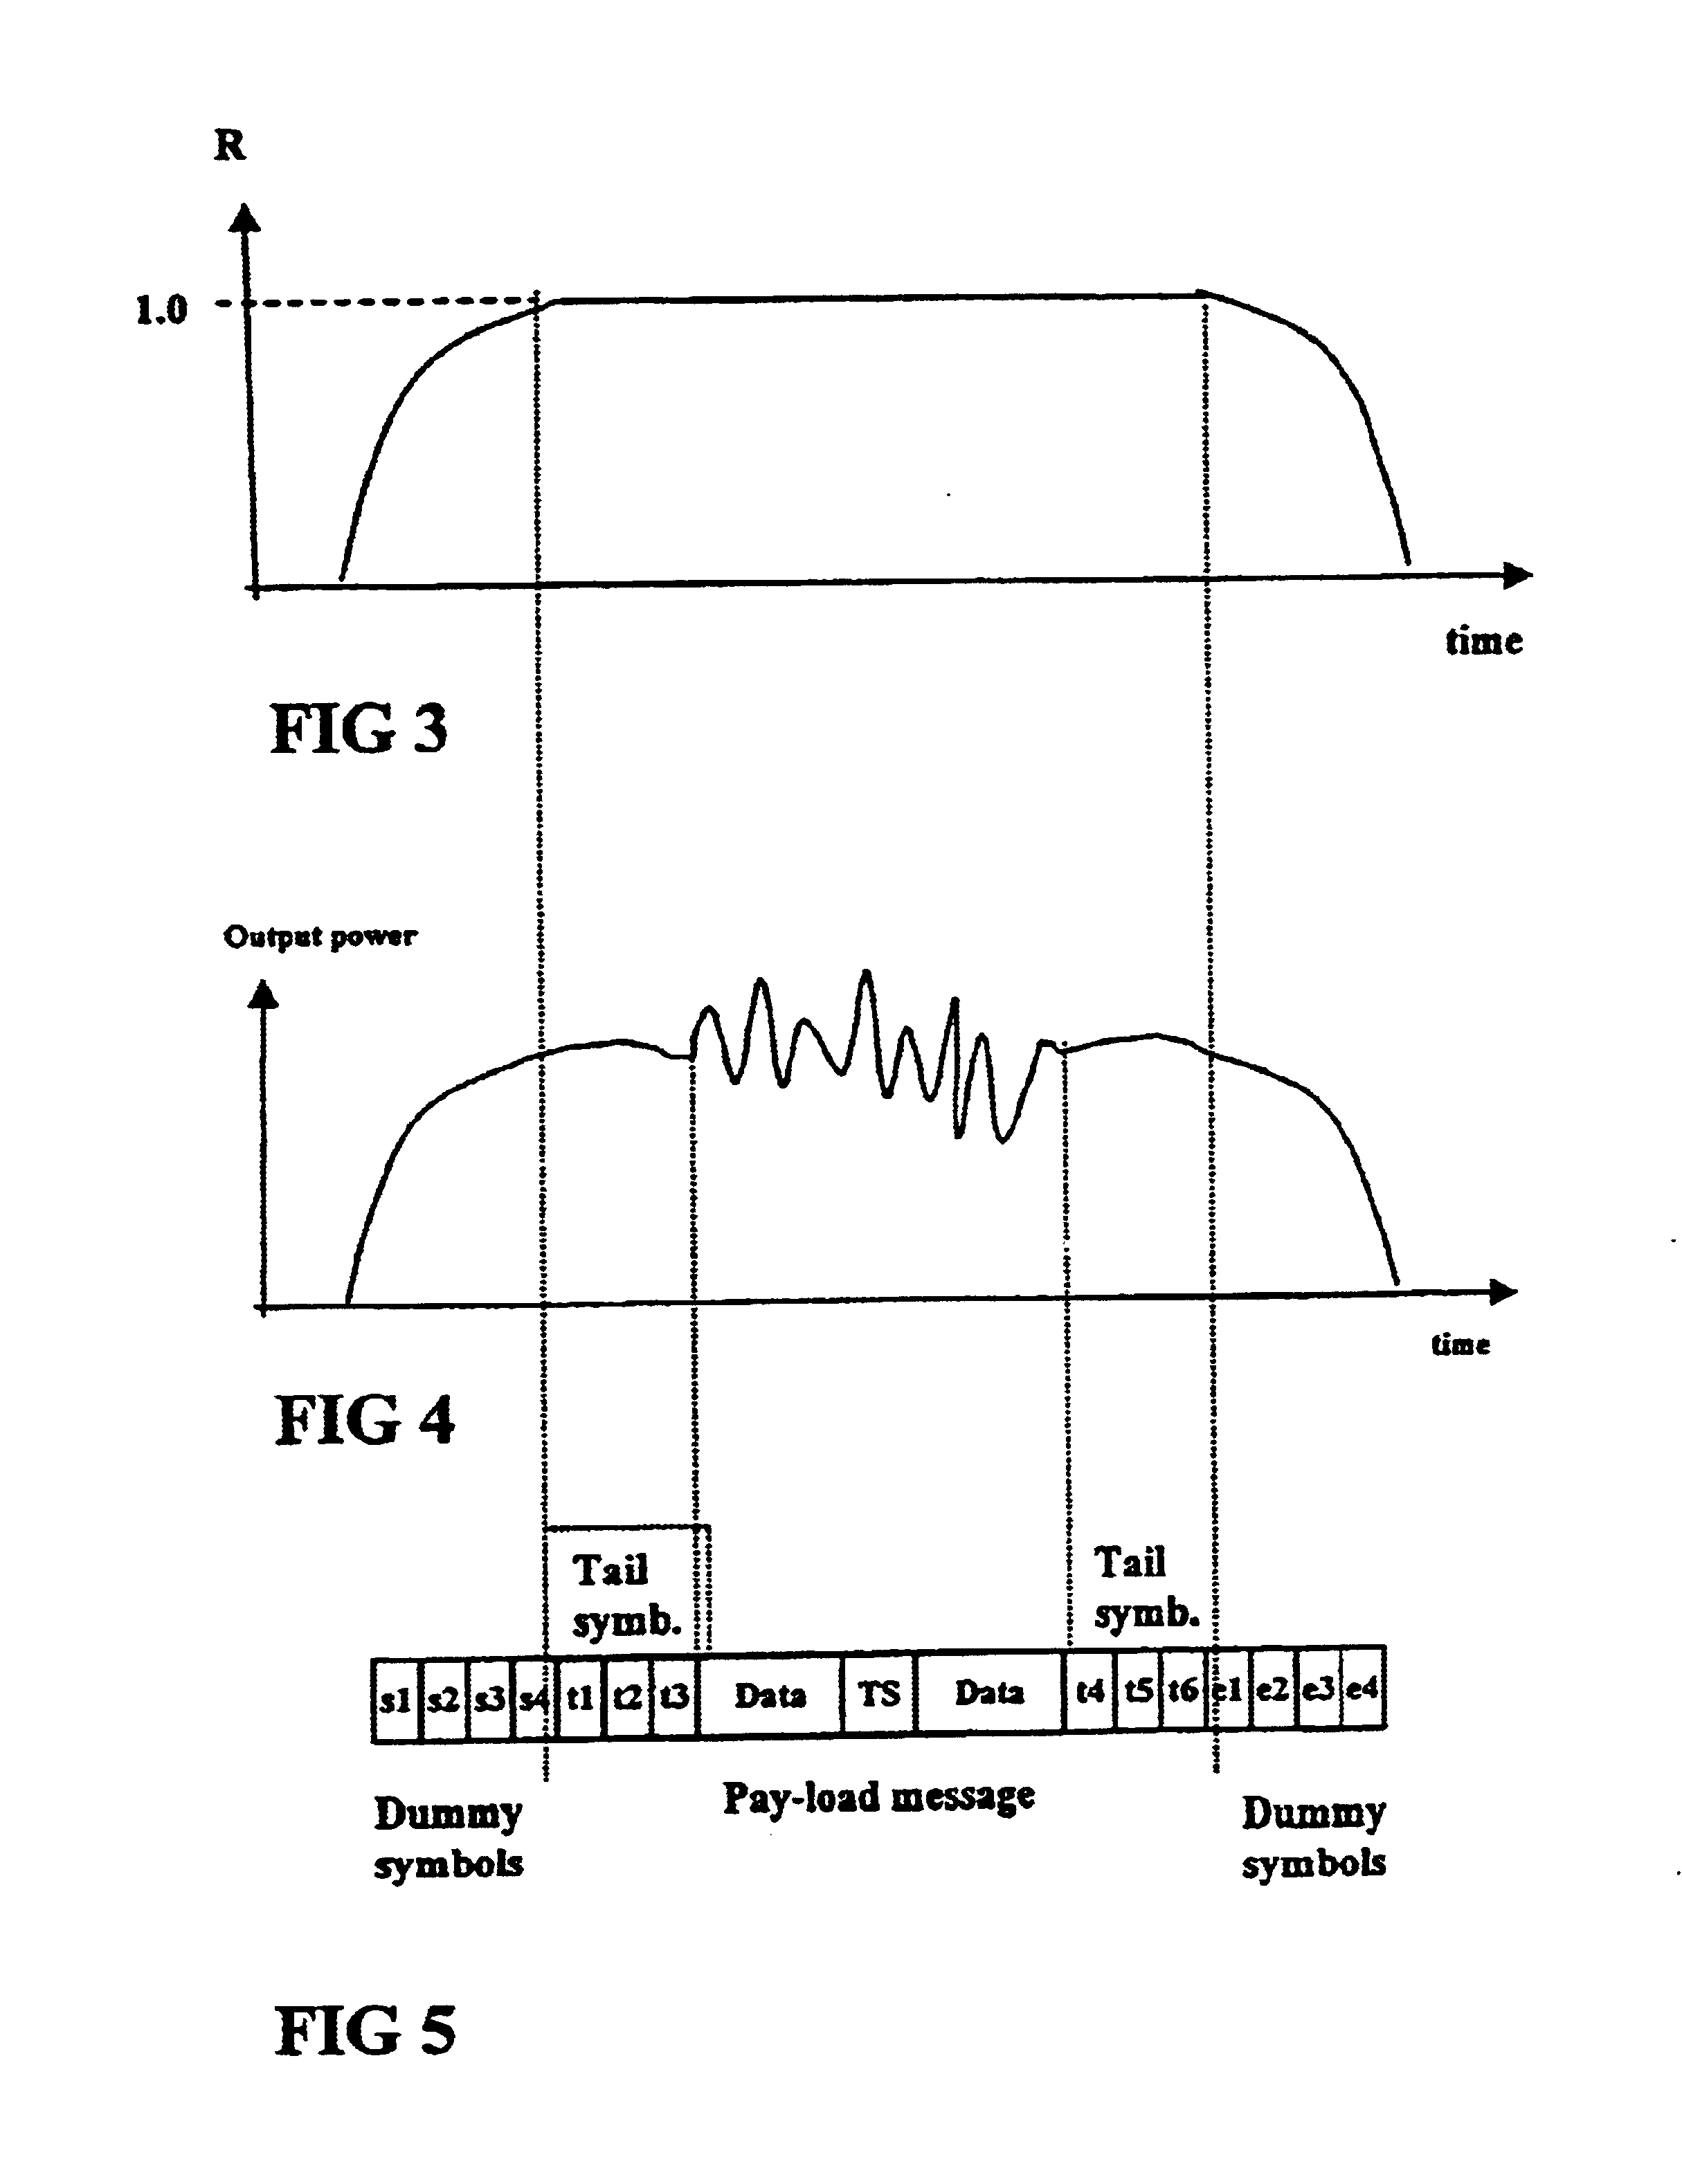 Power characteristic of a radio transmitter